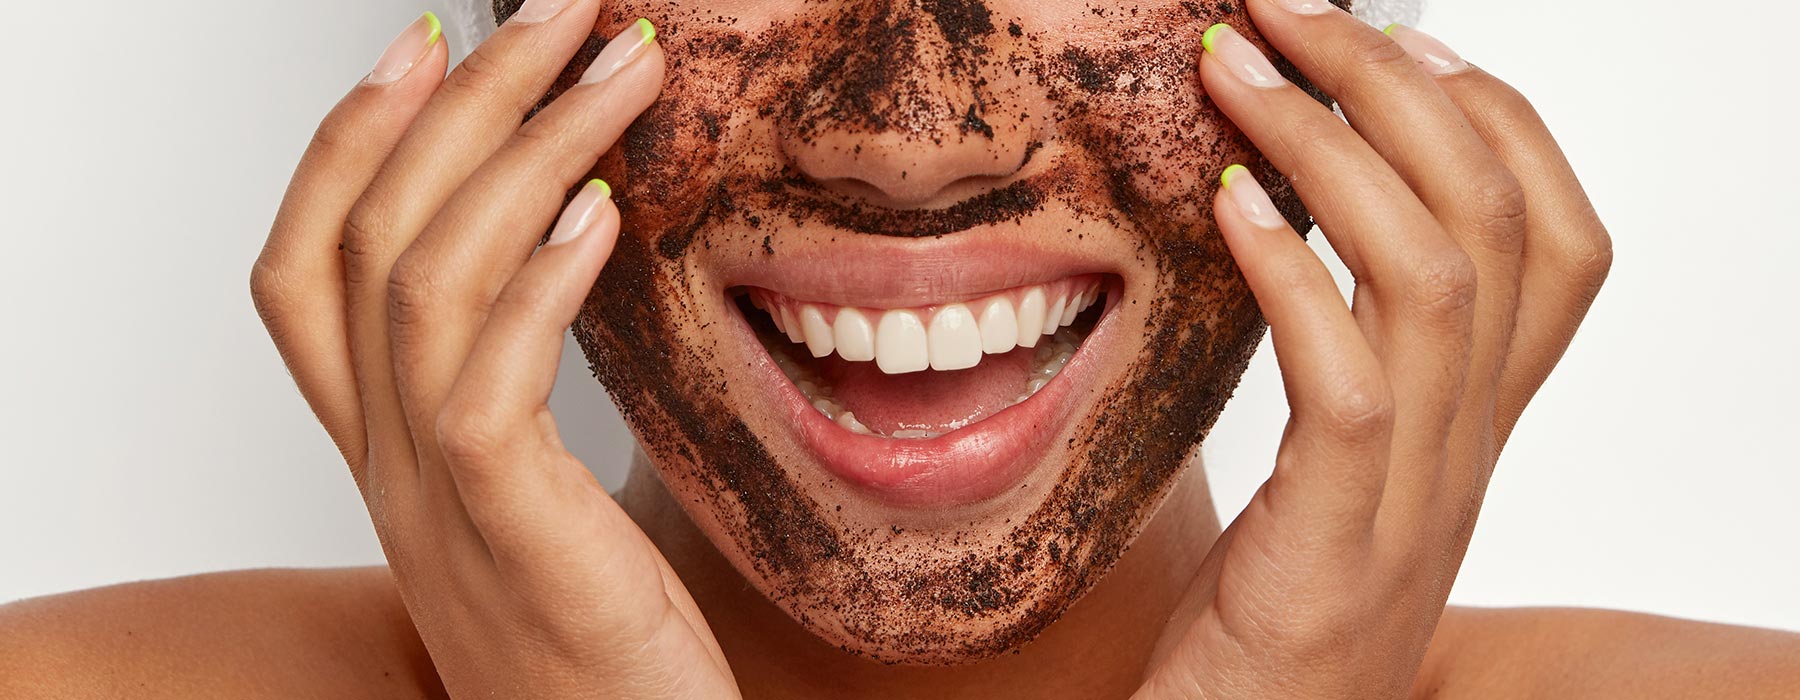 The 10 best ways to recycle coffee grounds: Using coffee grounds as a face scrub - Blog by EspressoWorks